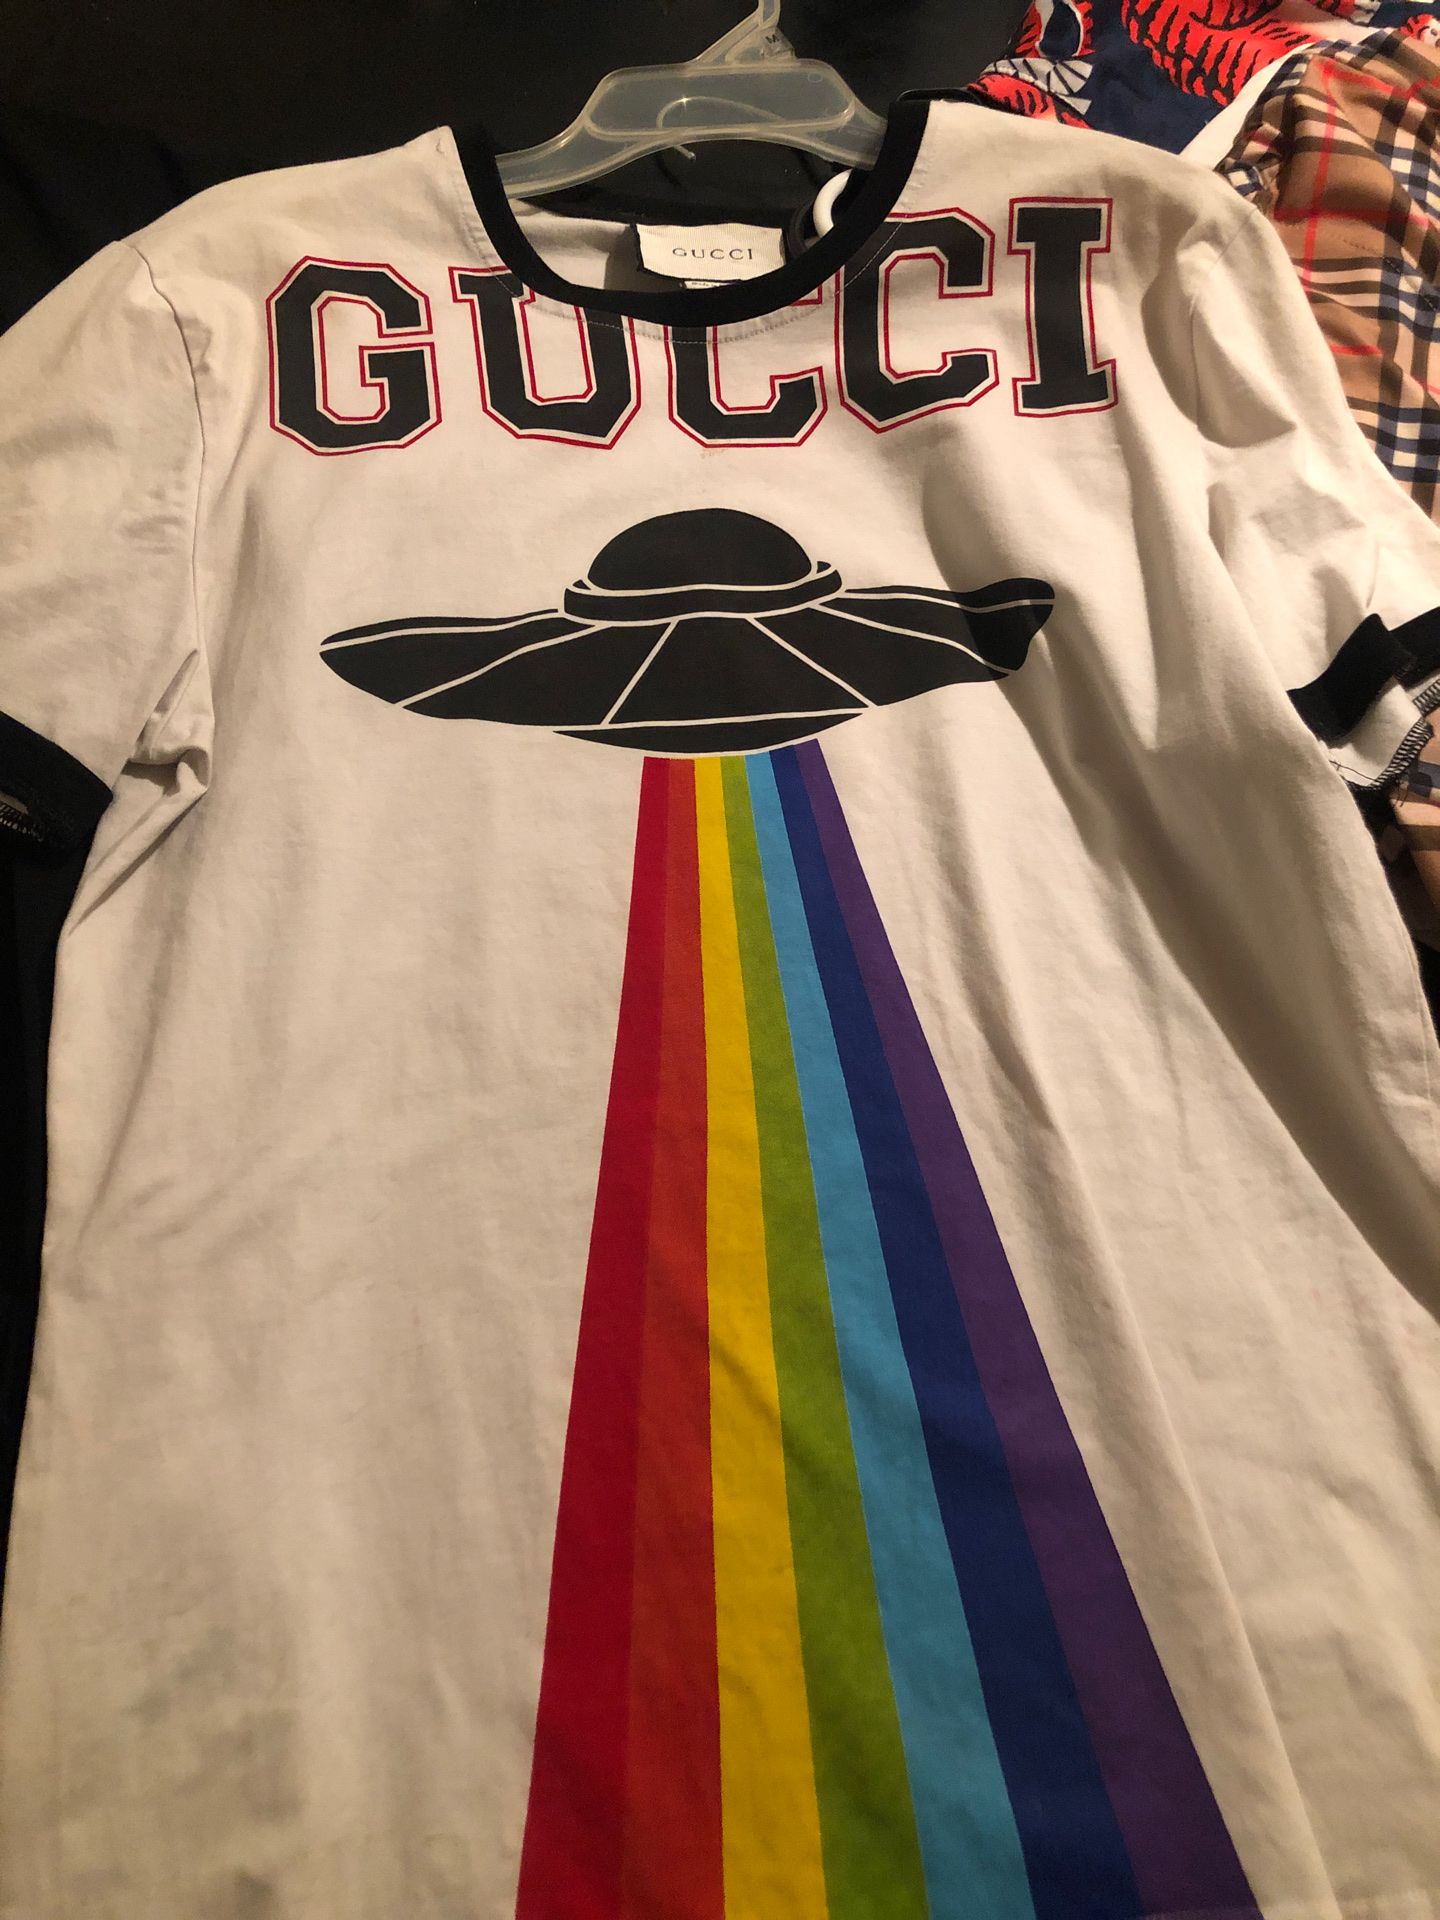 4 Gucci shirts one Gucci sweater and one Burberry shirt all for the let go